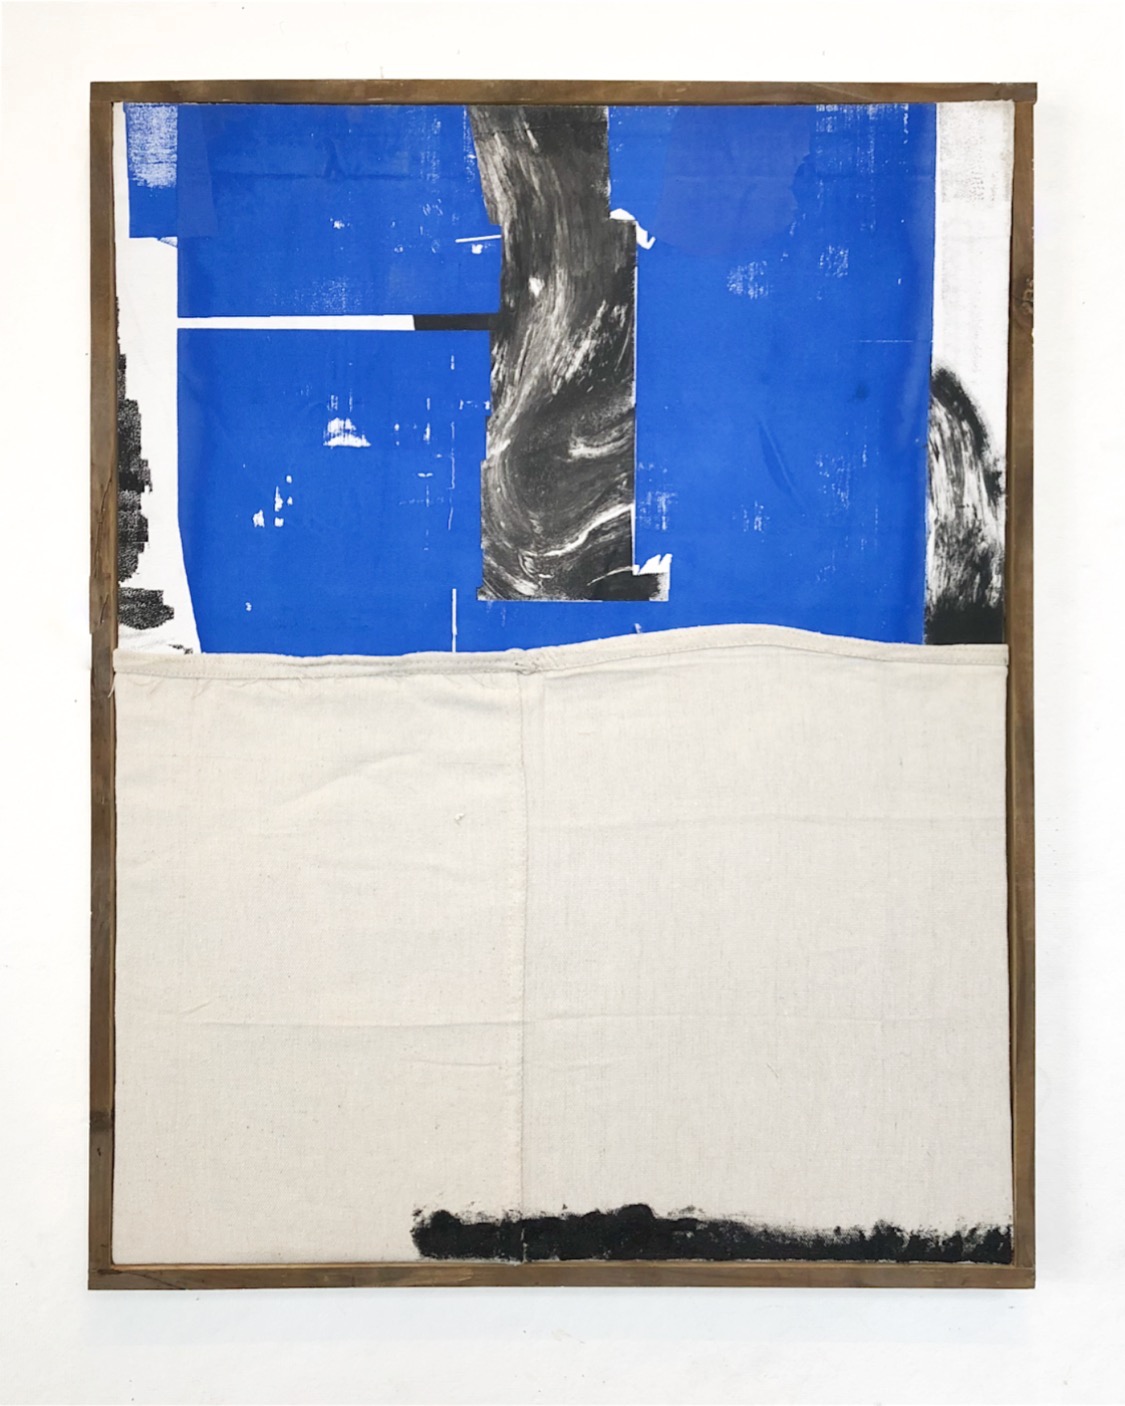 SHIV’AH2 (שבעה), gesso, oil stick and ink with sand from the West Bank and Israel on linen and microsuede. Stretched on silkscreen frame 21.5” x 27.5”, 2017